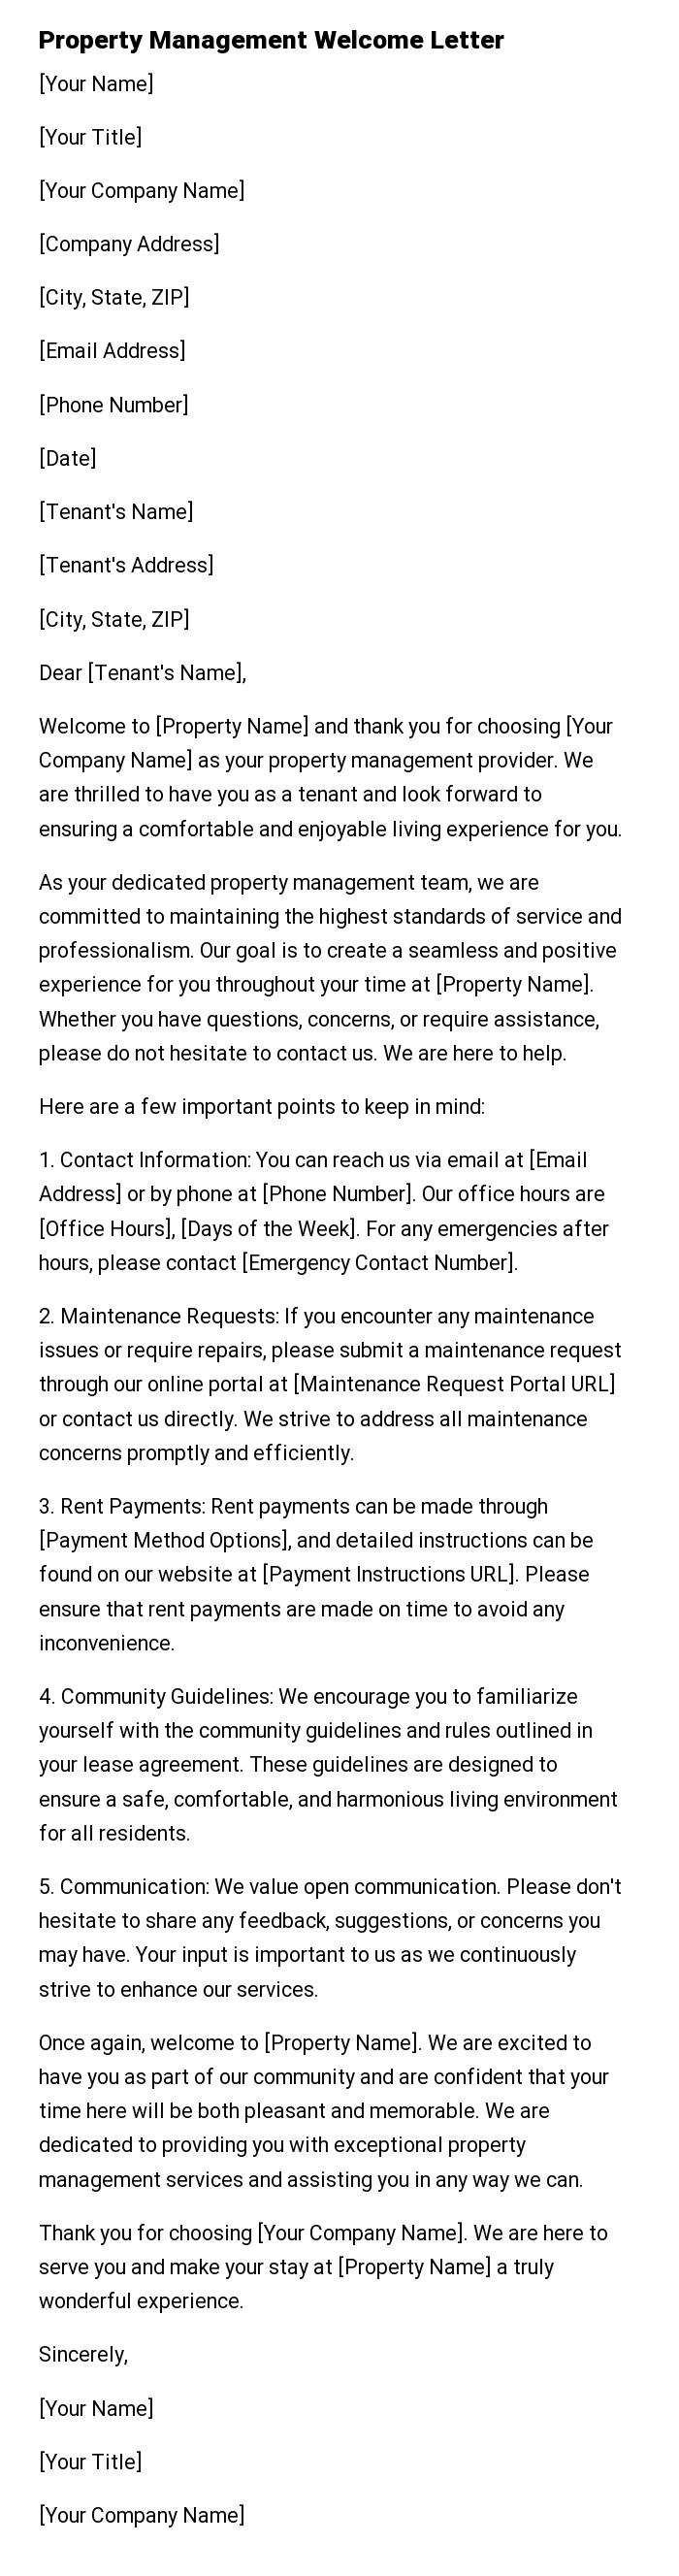 Property Management Welcome Letter